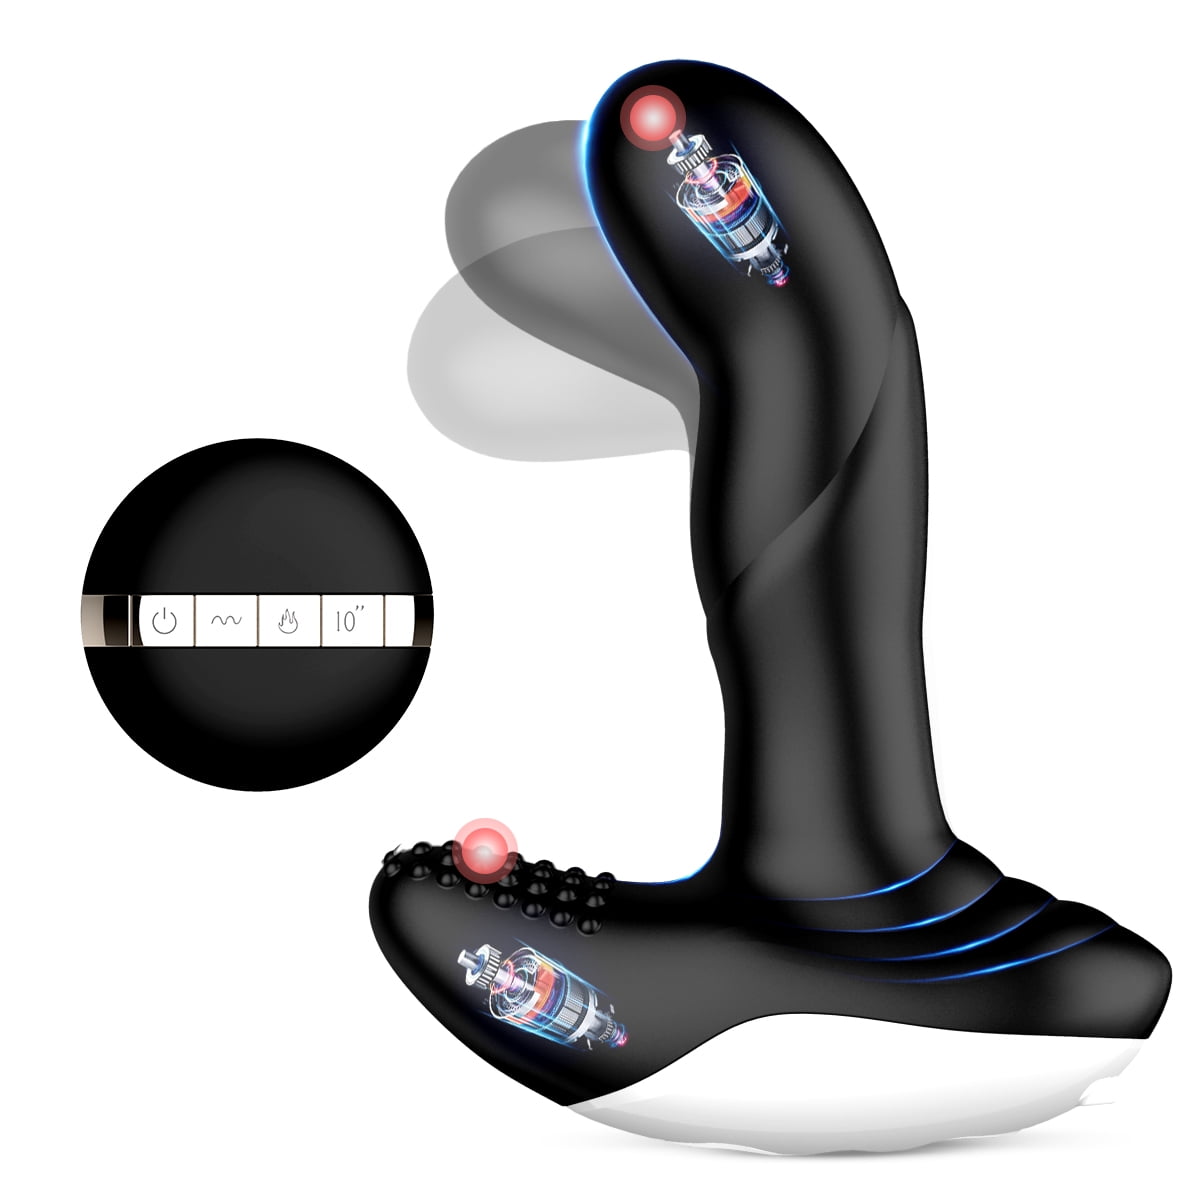 Thrusting Anal Vibrator Prostate Massager Anal Plug, Vibrating Male Anal Sex Toys for Men Women Couples Adult Sex Pleasure, Remote Control Anal Toy Vibrator with 7 Vibration and 3 Wiggle Modes picture image